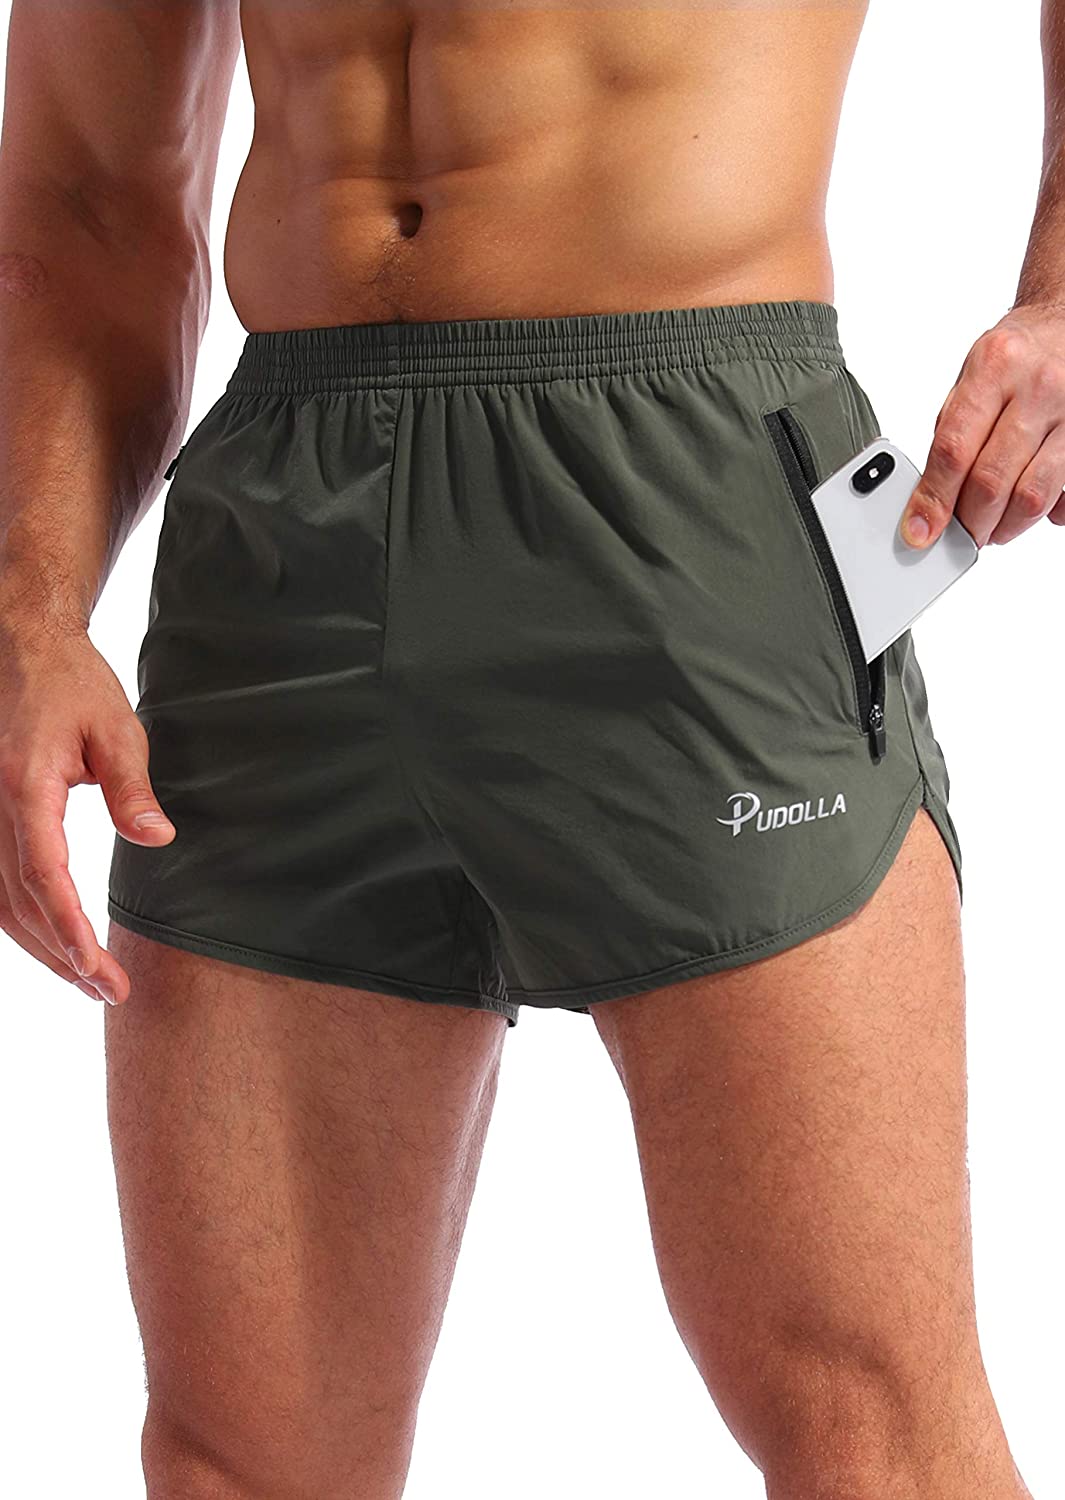 Pudolla Men’s Running Shorts 3 Inch Quick Dry Gym Athletic Workout Shorts  for Me